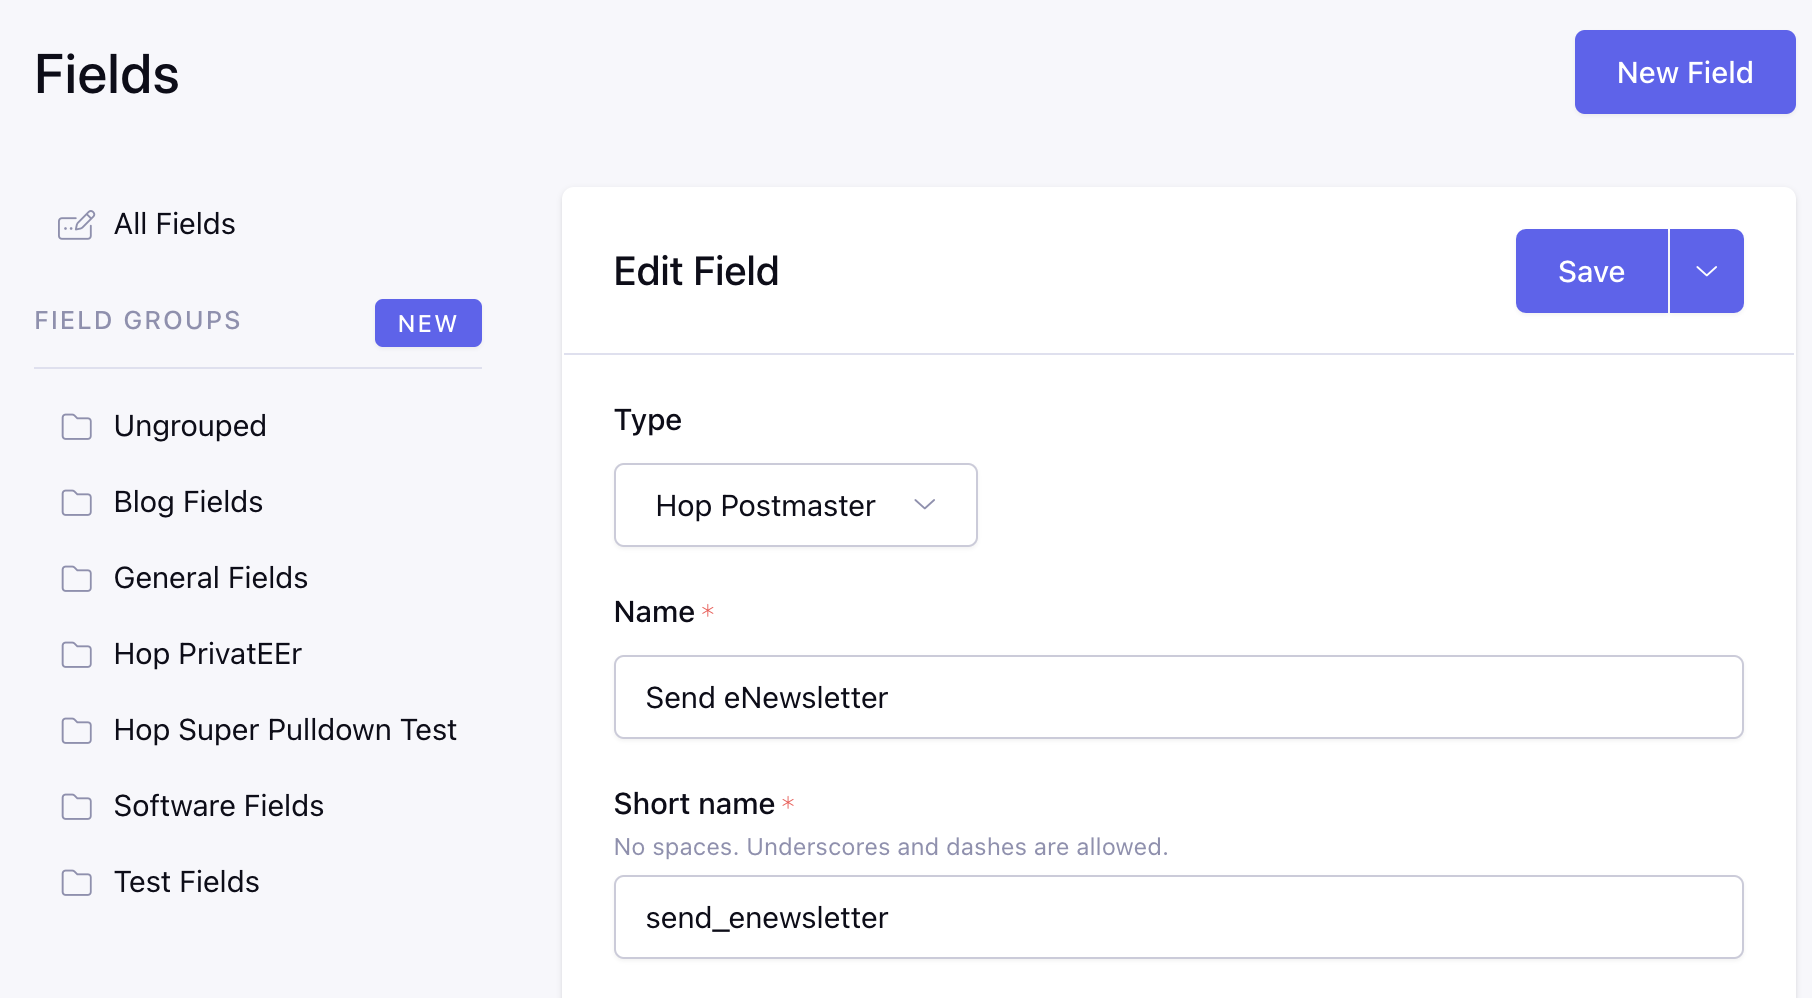 Create a Hop Postmaster field for use in any channel